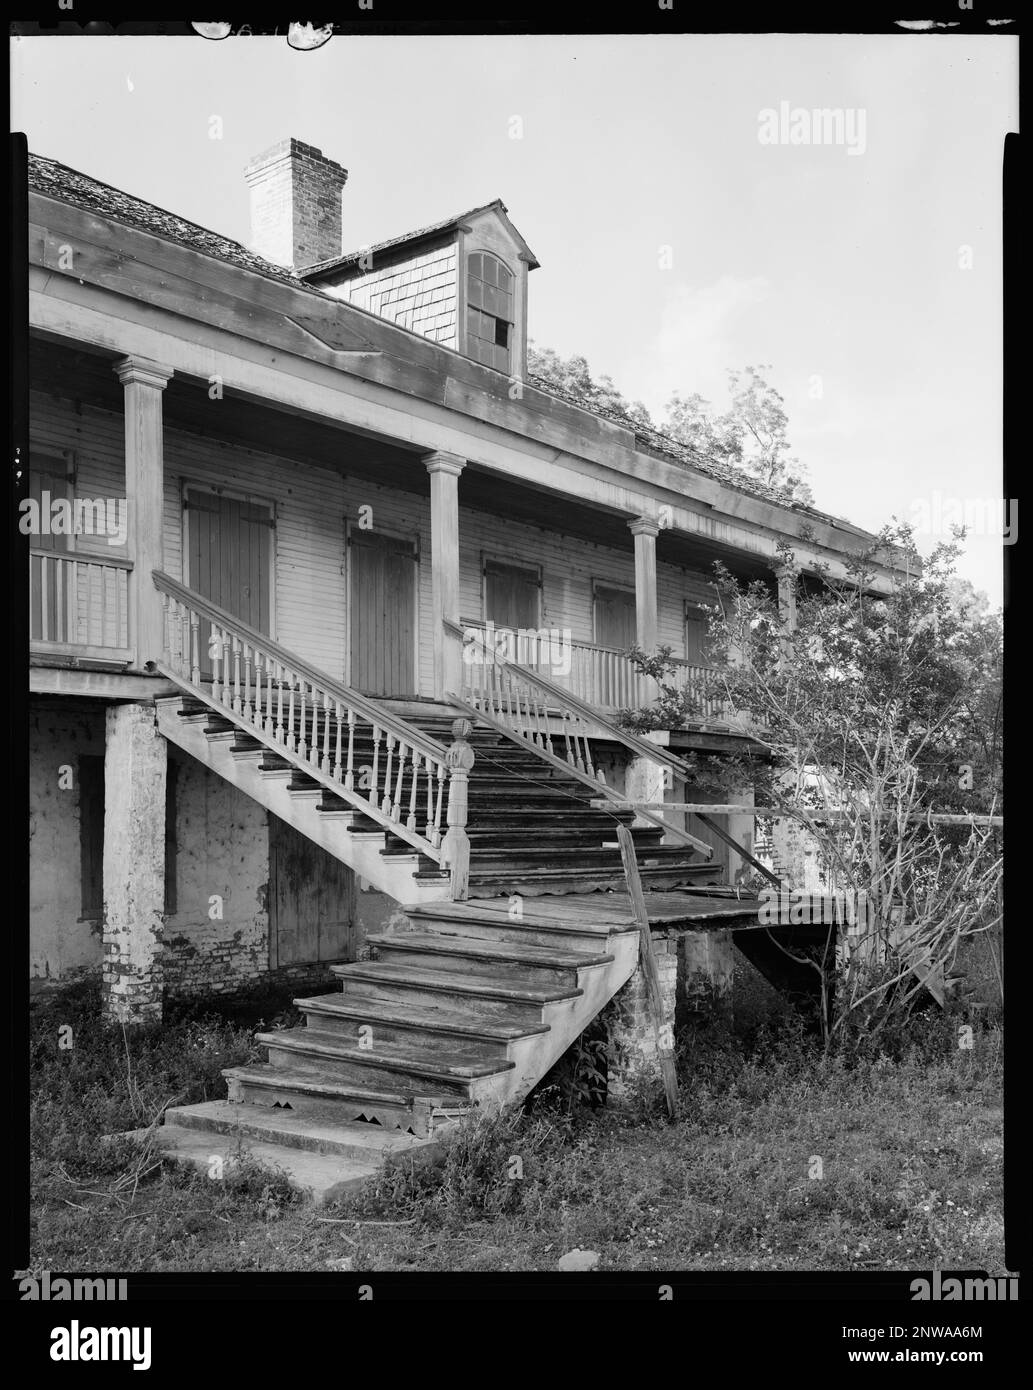 Montague or Montagut Plantation, Reserve, St. John the Baptist Parish, Louisiana. Carnegie Survey of the Architecture of the South. United States, Louisiana, St. John the Baptist Parish, Reserve,  Abandoned buildings,  Balconies,  Dormers,  Houses,  Stairways. Stock Photo